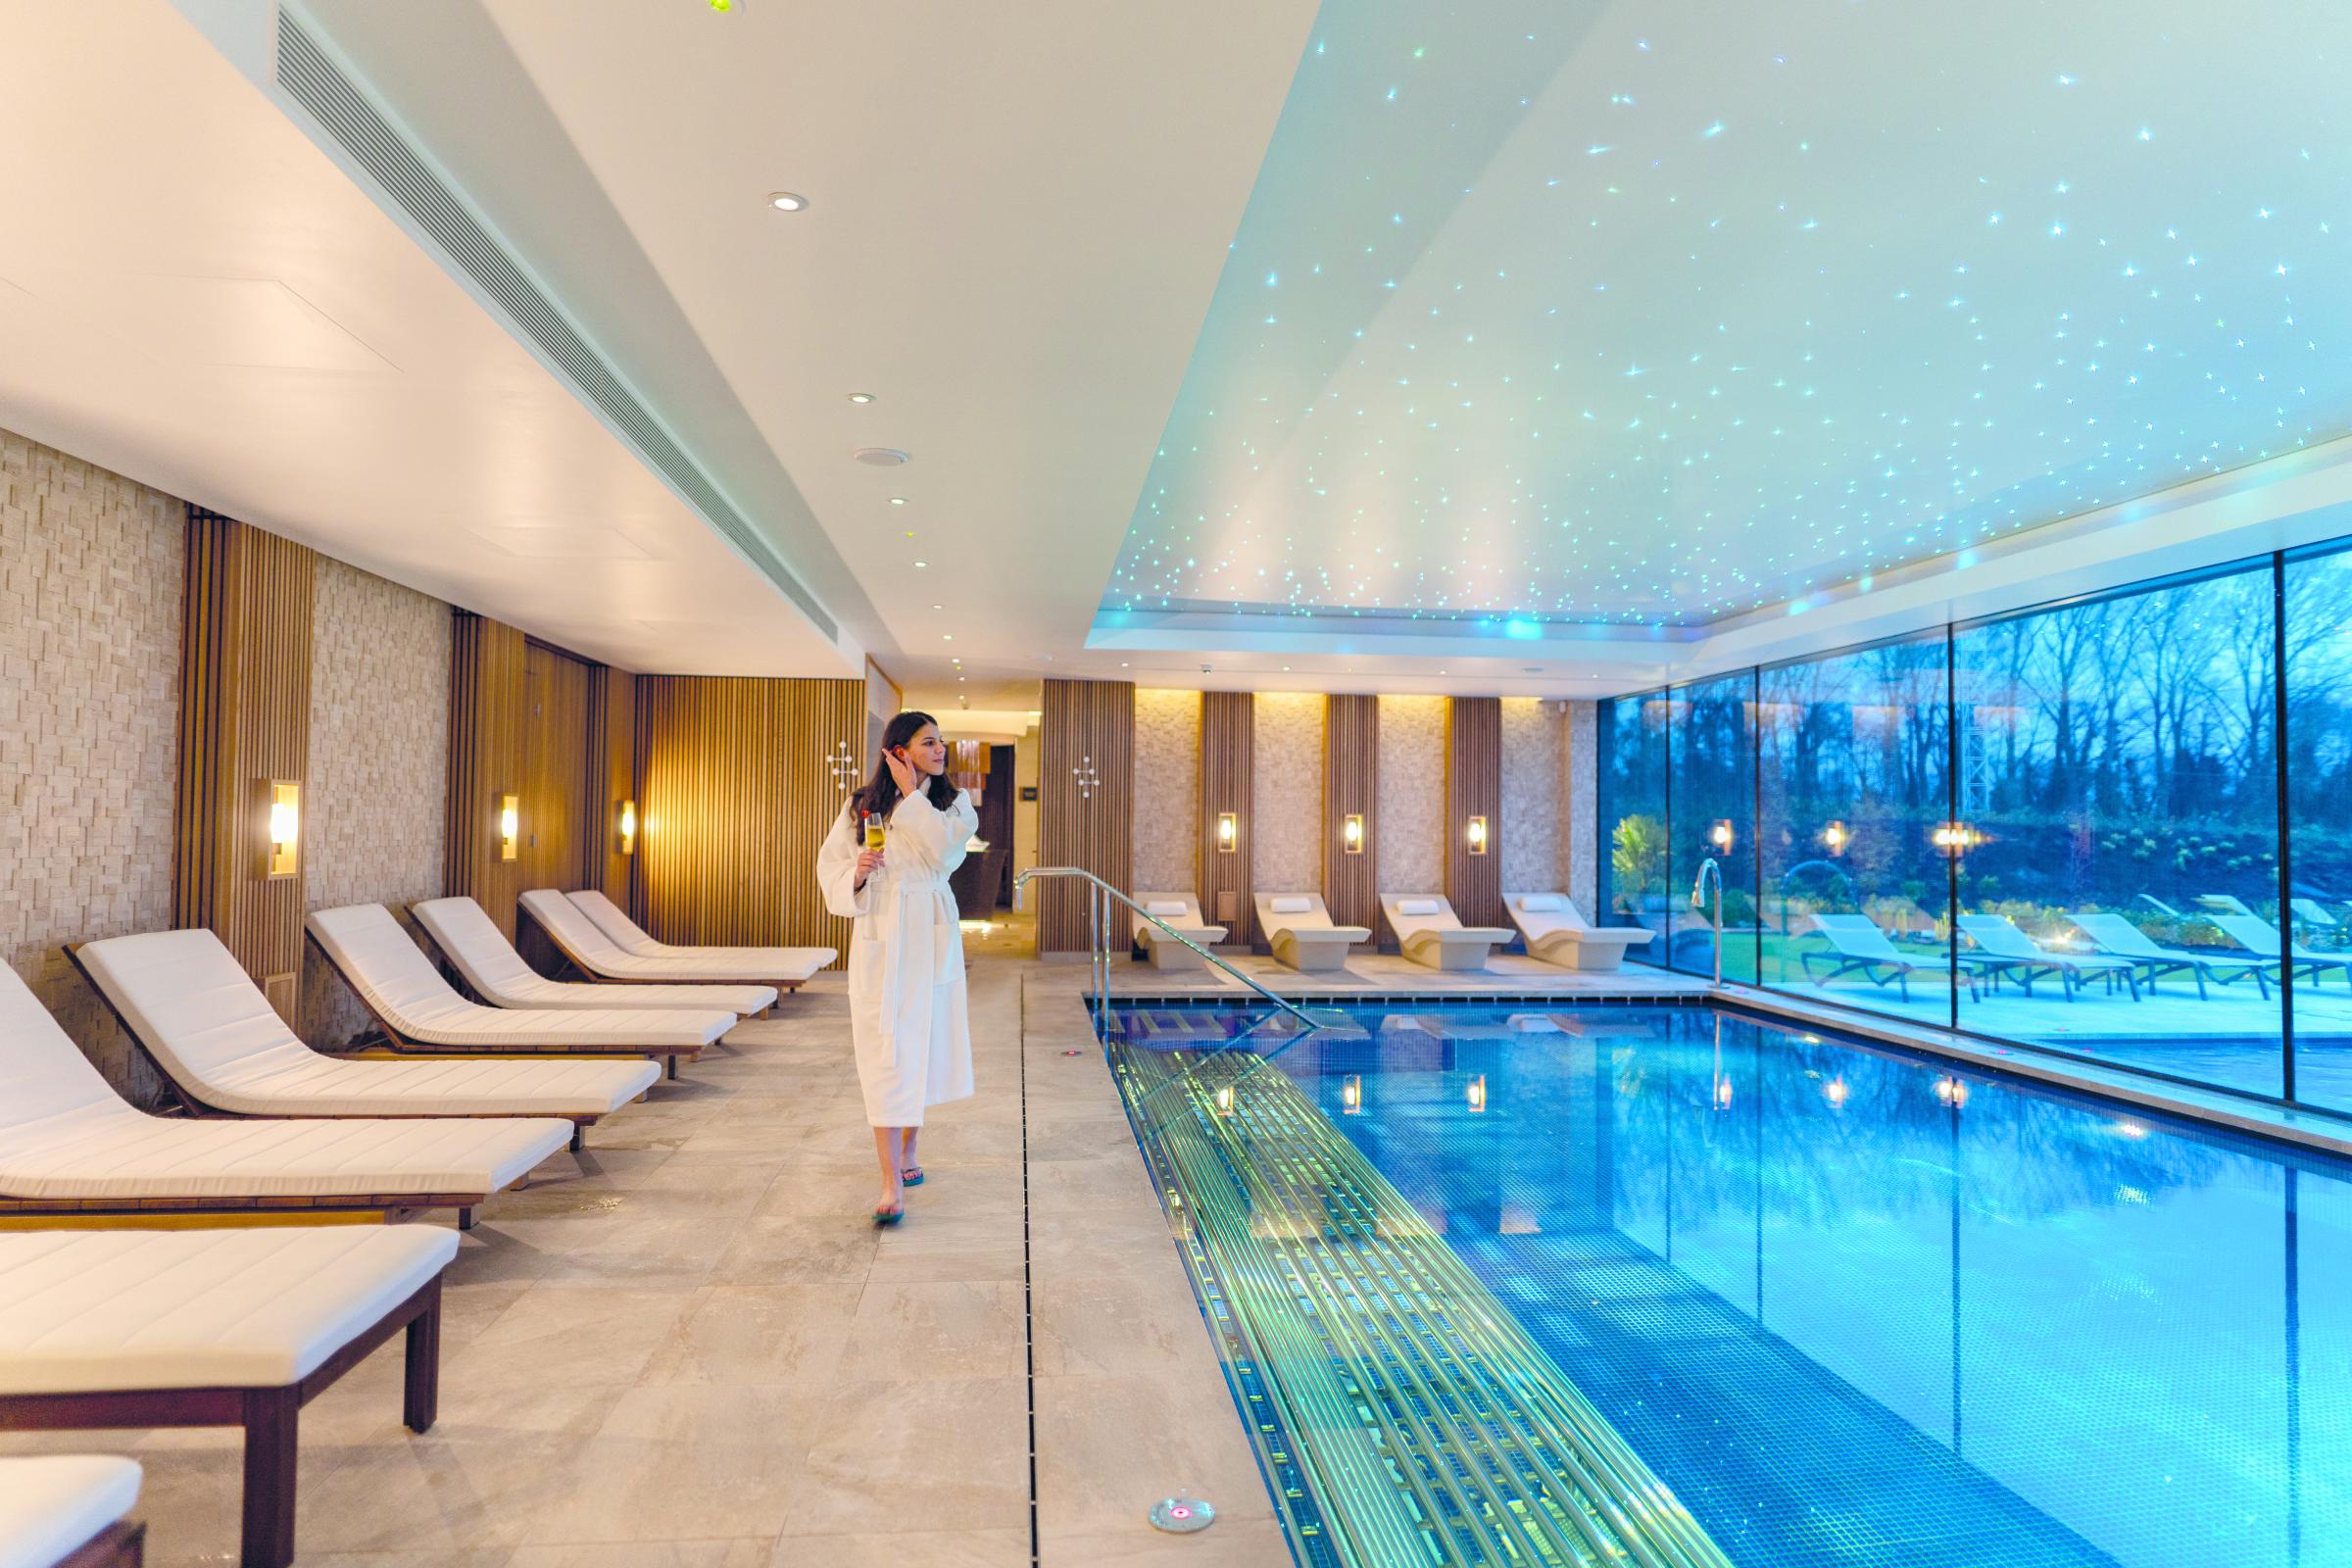 The Spa at Carden has won a hat-trick of accolades at this years World Luxury Spa Awards.